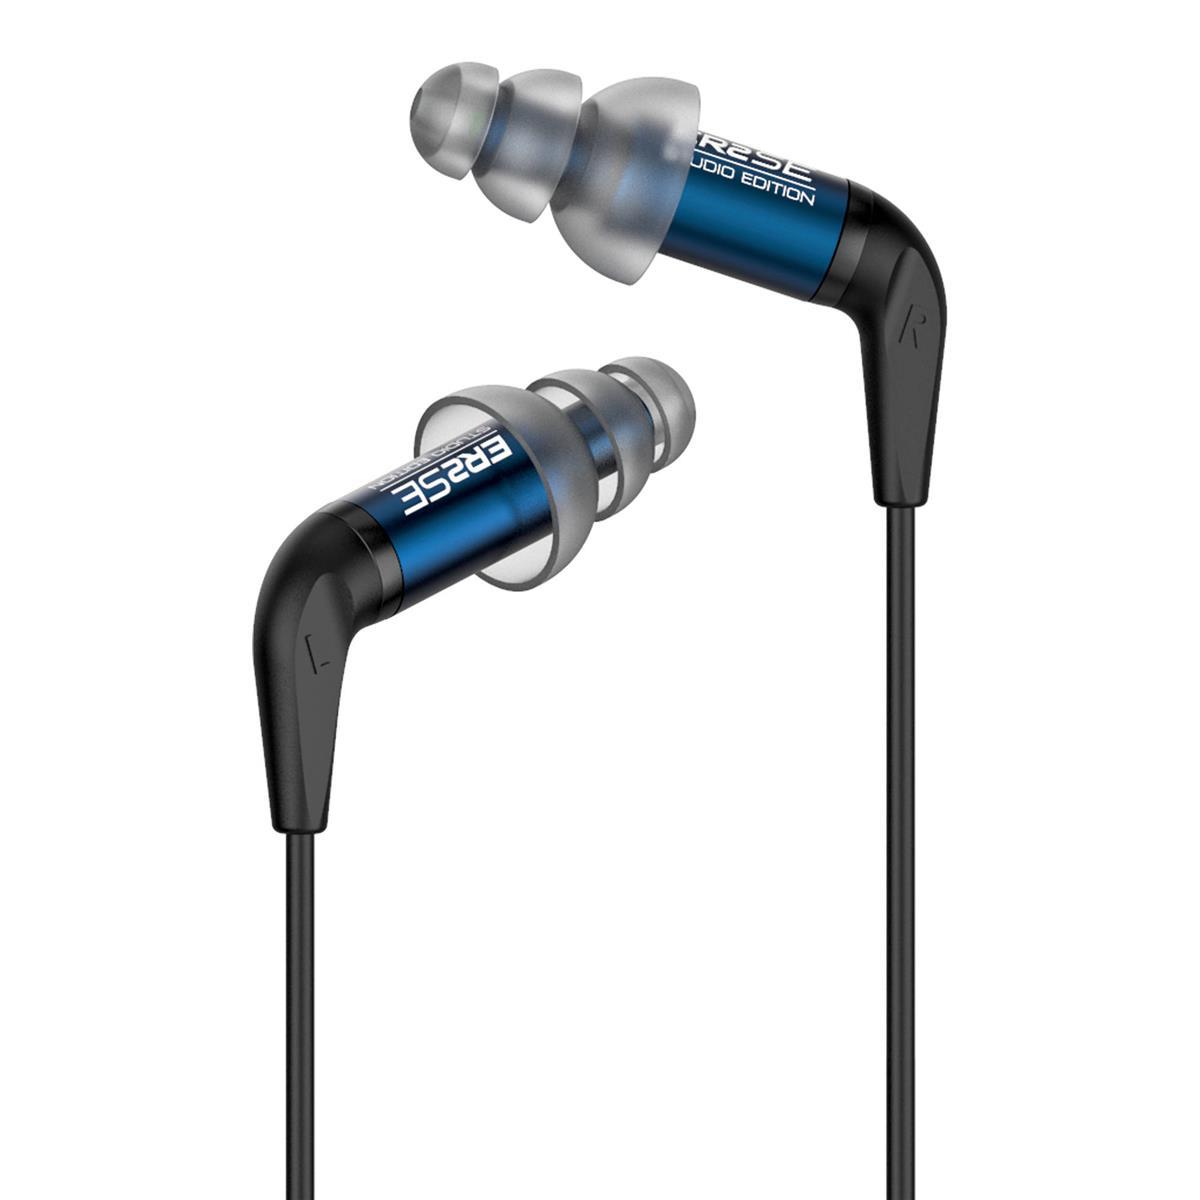 Etymotic Research ER2SE Dynamic Studio Edition Earphones for $49 Shipped